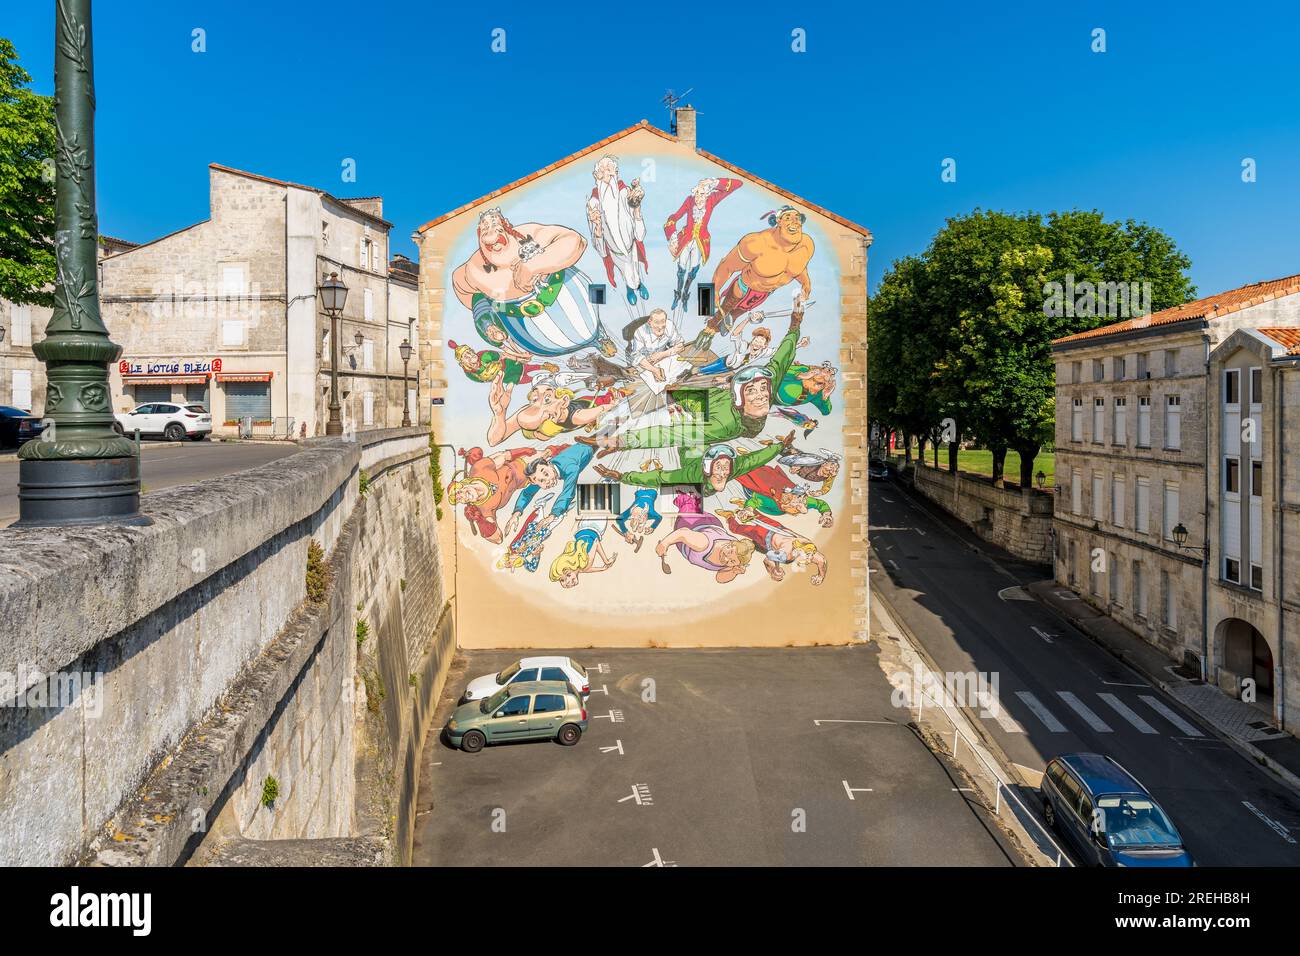 Giant Mural dedicated to Comic Book Artist Albert Uderzo in Angouleme, France. Uderzo is best known for making the Asterix Comic Book series. Stock Photo